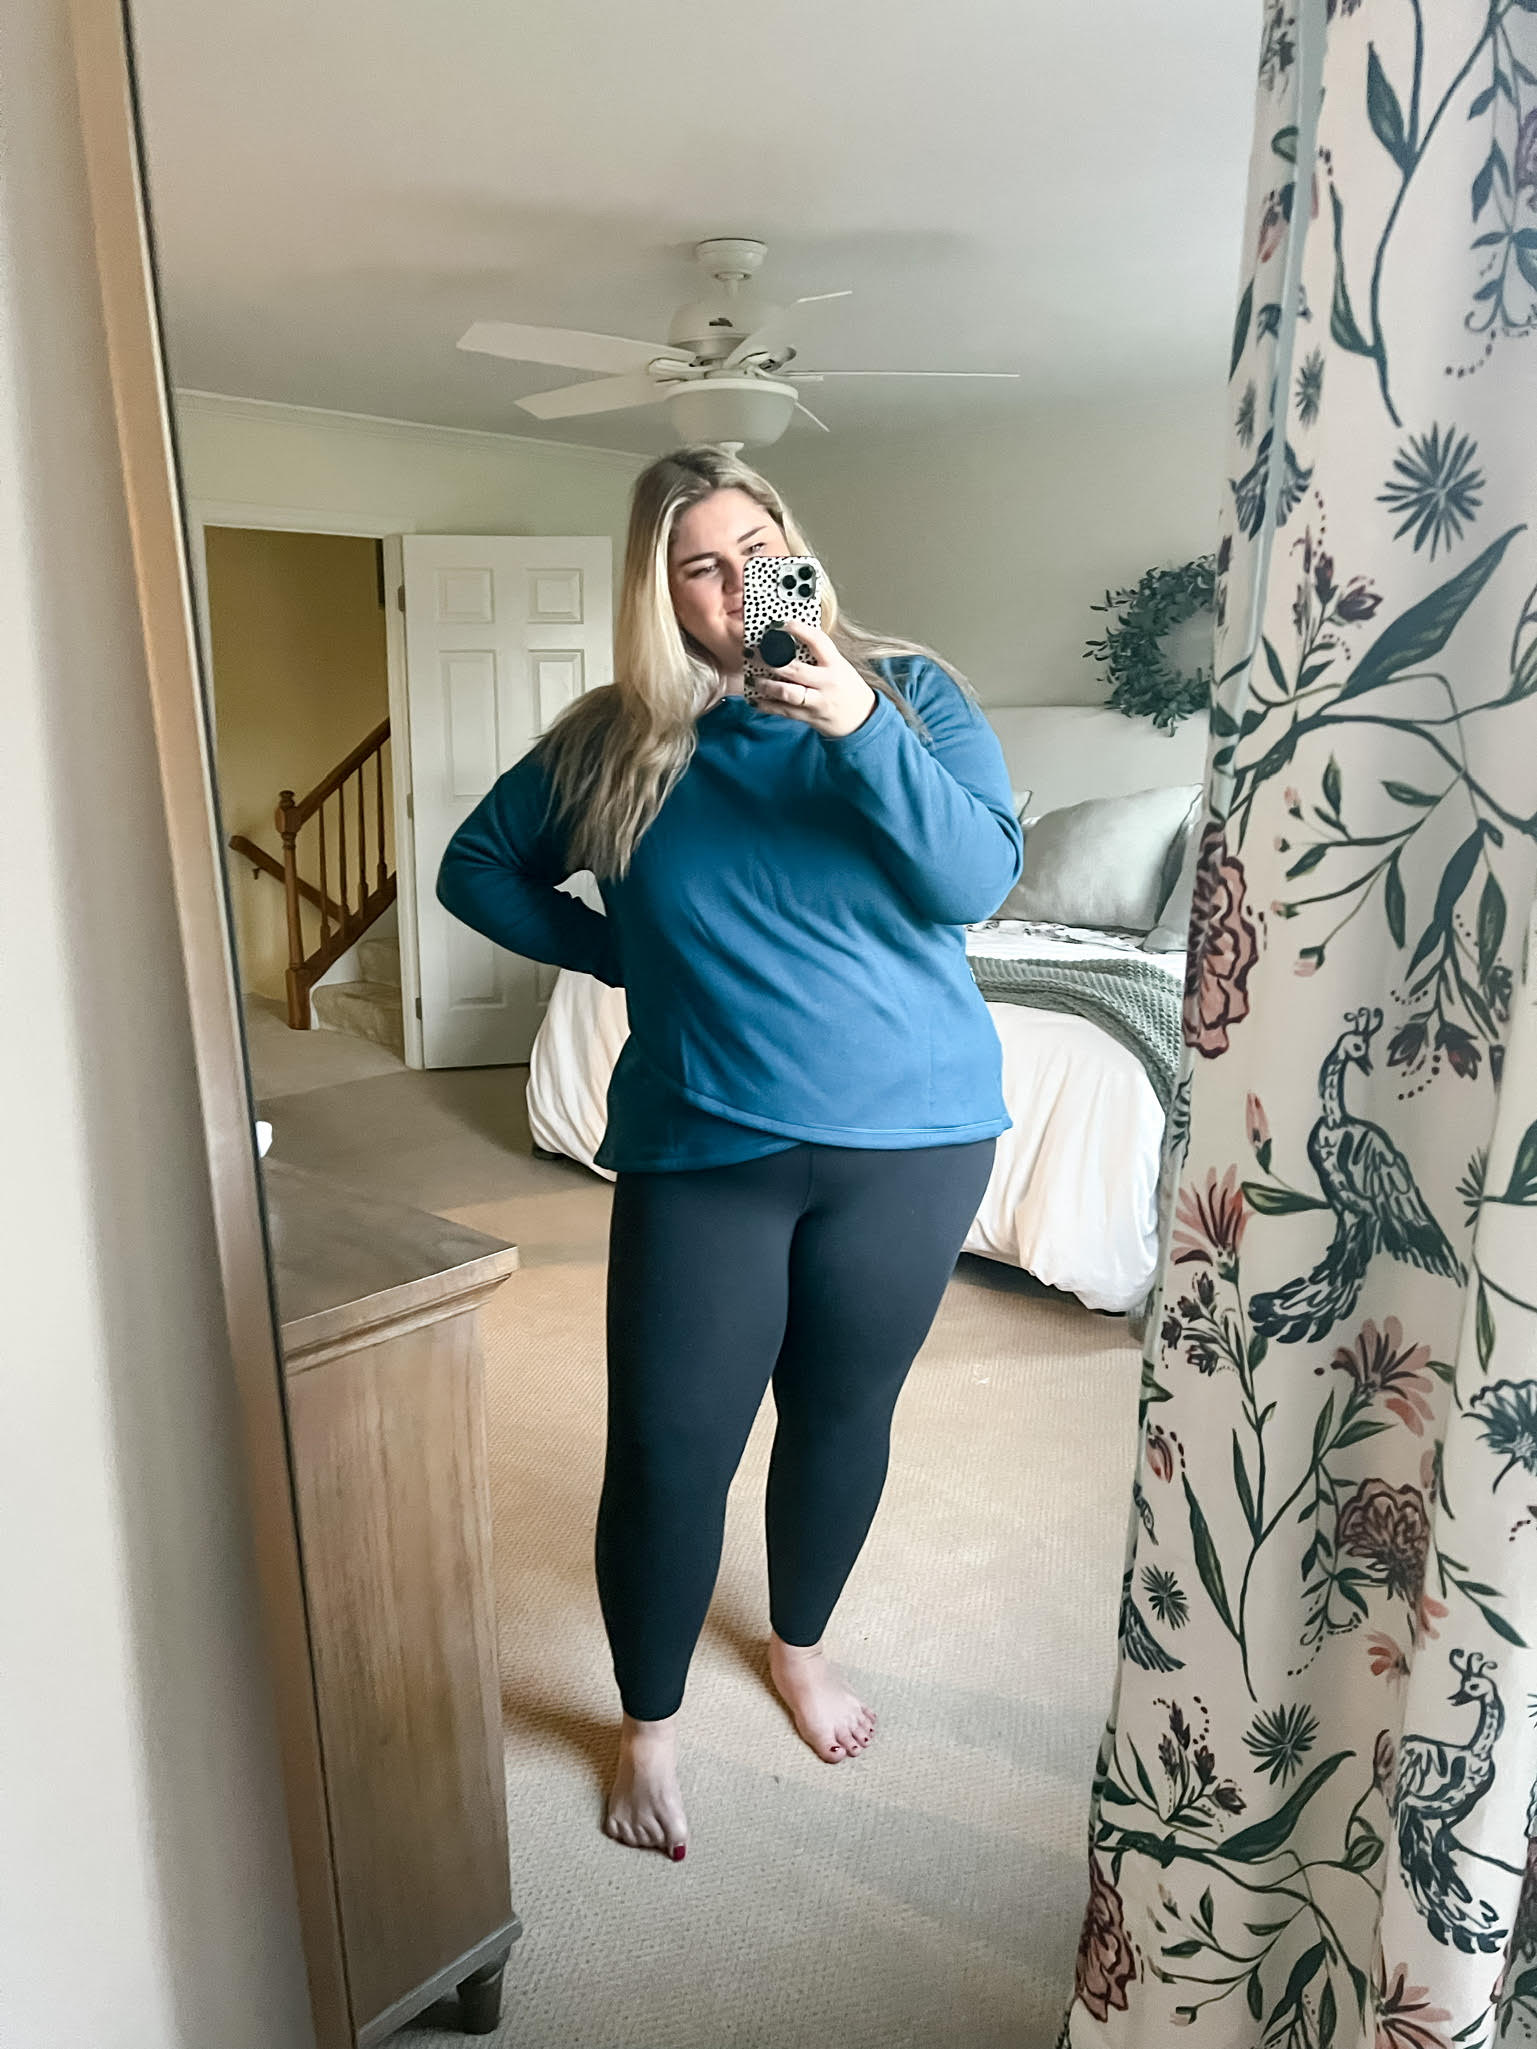 12 Plus Size Leggings Outfits You Should Try This Year - www